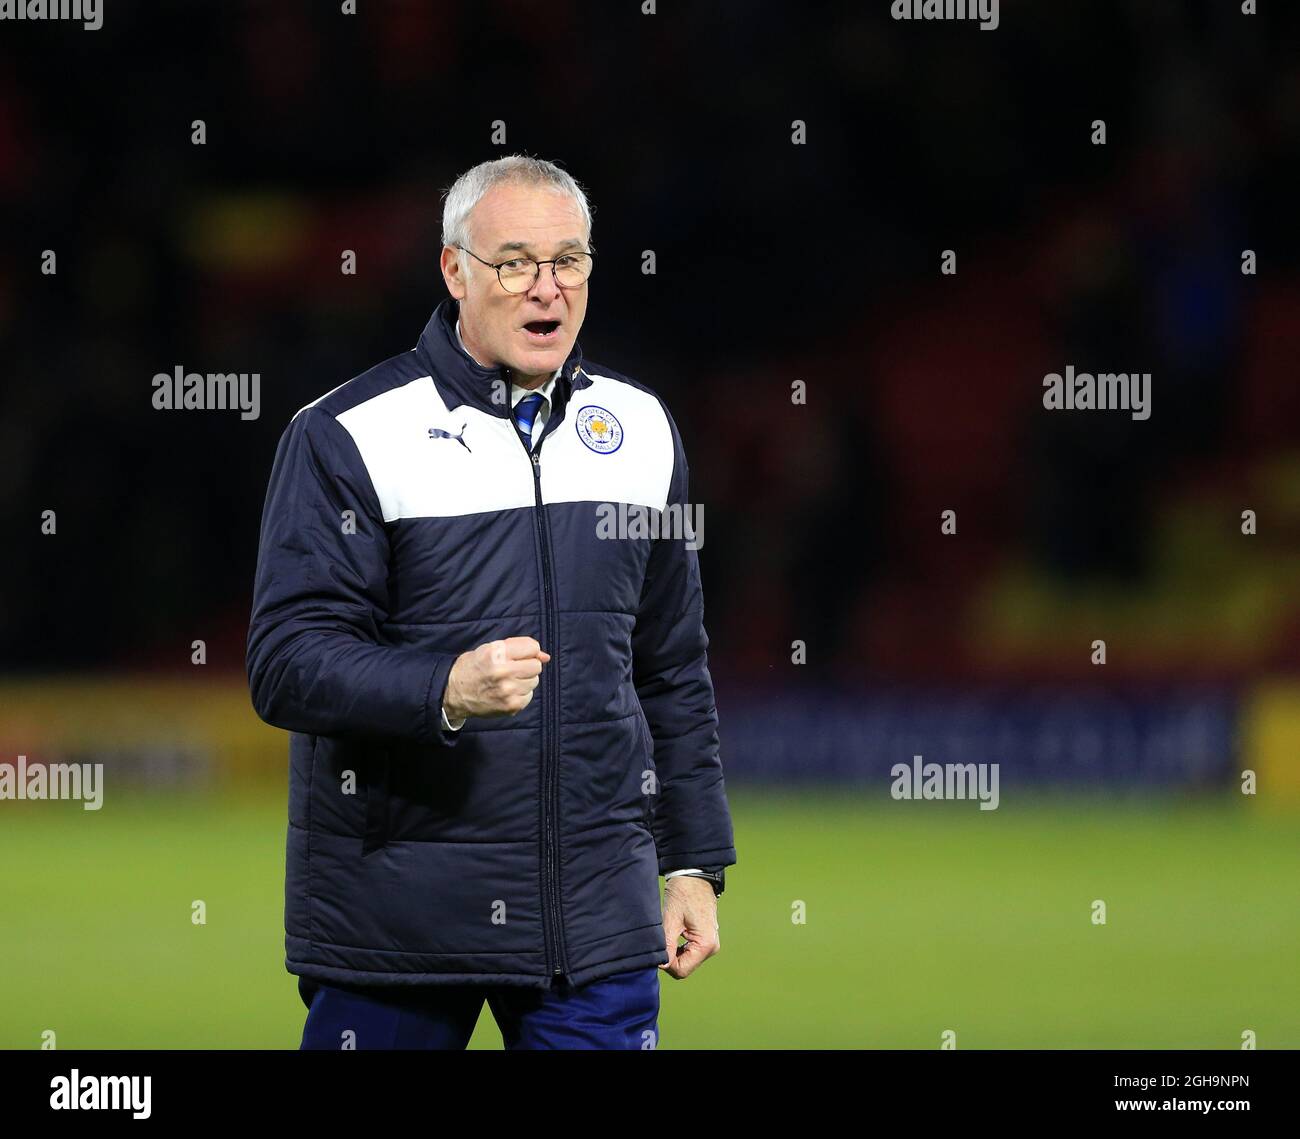 Leicester City's Claudio Ranieri celebrates at the final whistle  - English Premier League - Watford vs Leicester City  - Vicarage Road - London - England - 5th March 2016 - Pic David Klein/Sportimageduring the Barclays Premier League match at Vicarage Road.  Photo credit should read: David Klein/Sportimage via PA Images Stock Photo